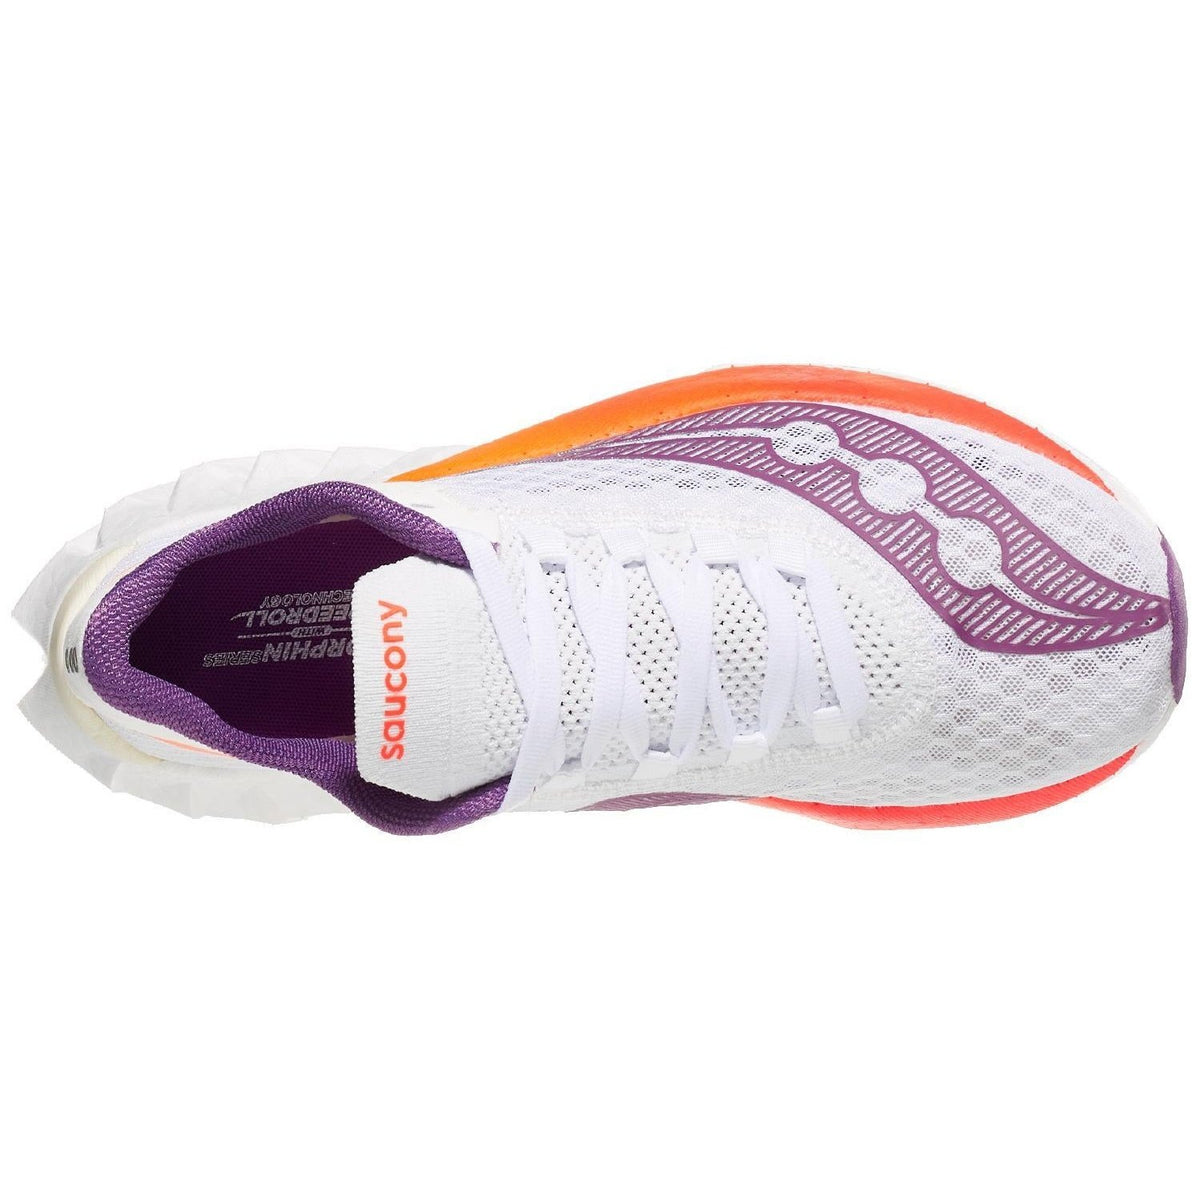 Saucony Endorphin Pro 4 Womens FOOTWEAR - Womens Carbon Plate 